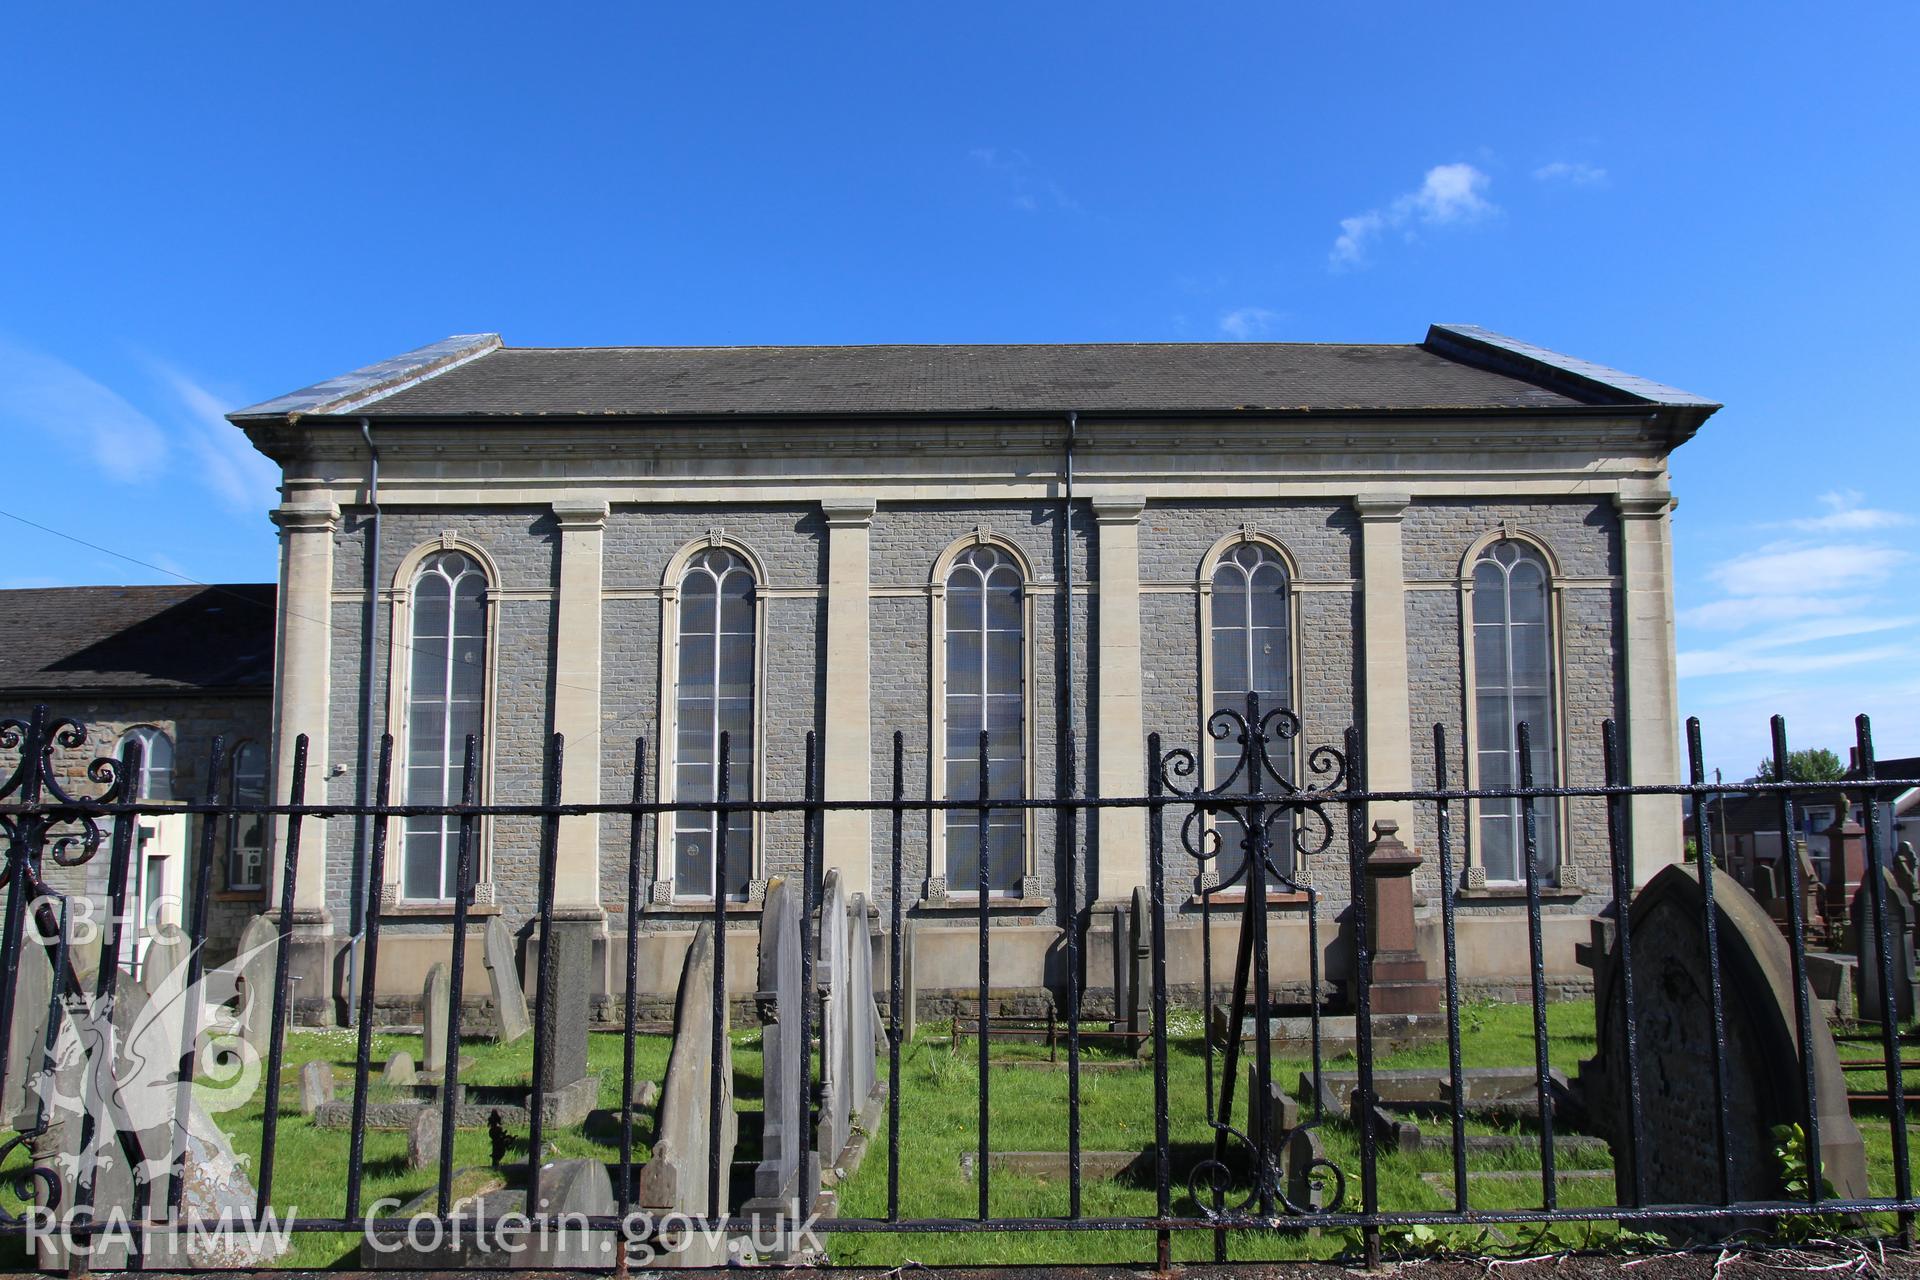 Exterior view of chapel with graveyard and iron fence in foreground. Photographic survey of Seion Welsh Baptist Chapel, Morriston, conducted by Sue Fielding on 13th May 2017.